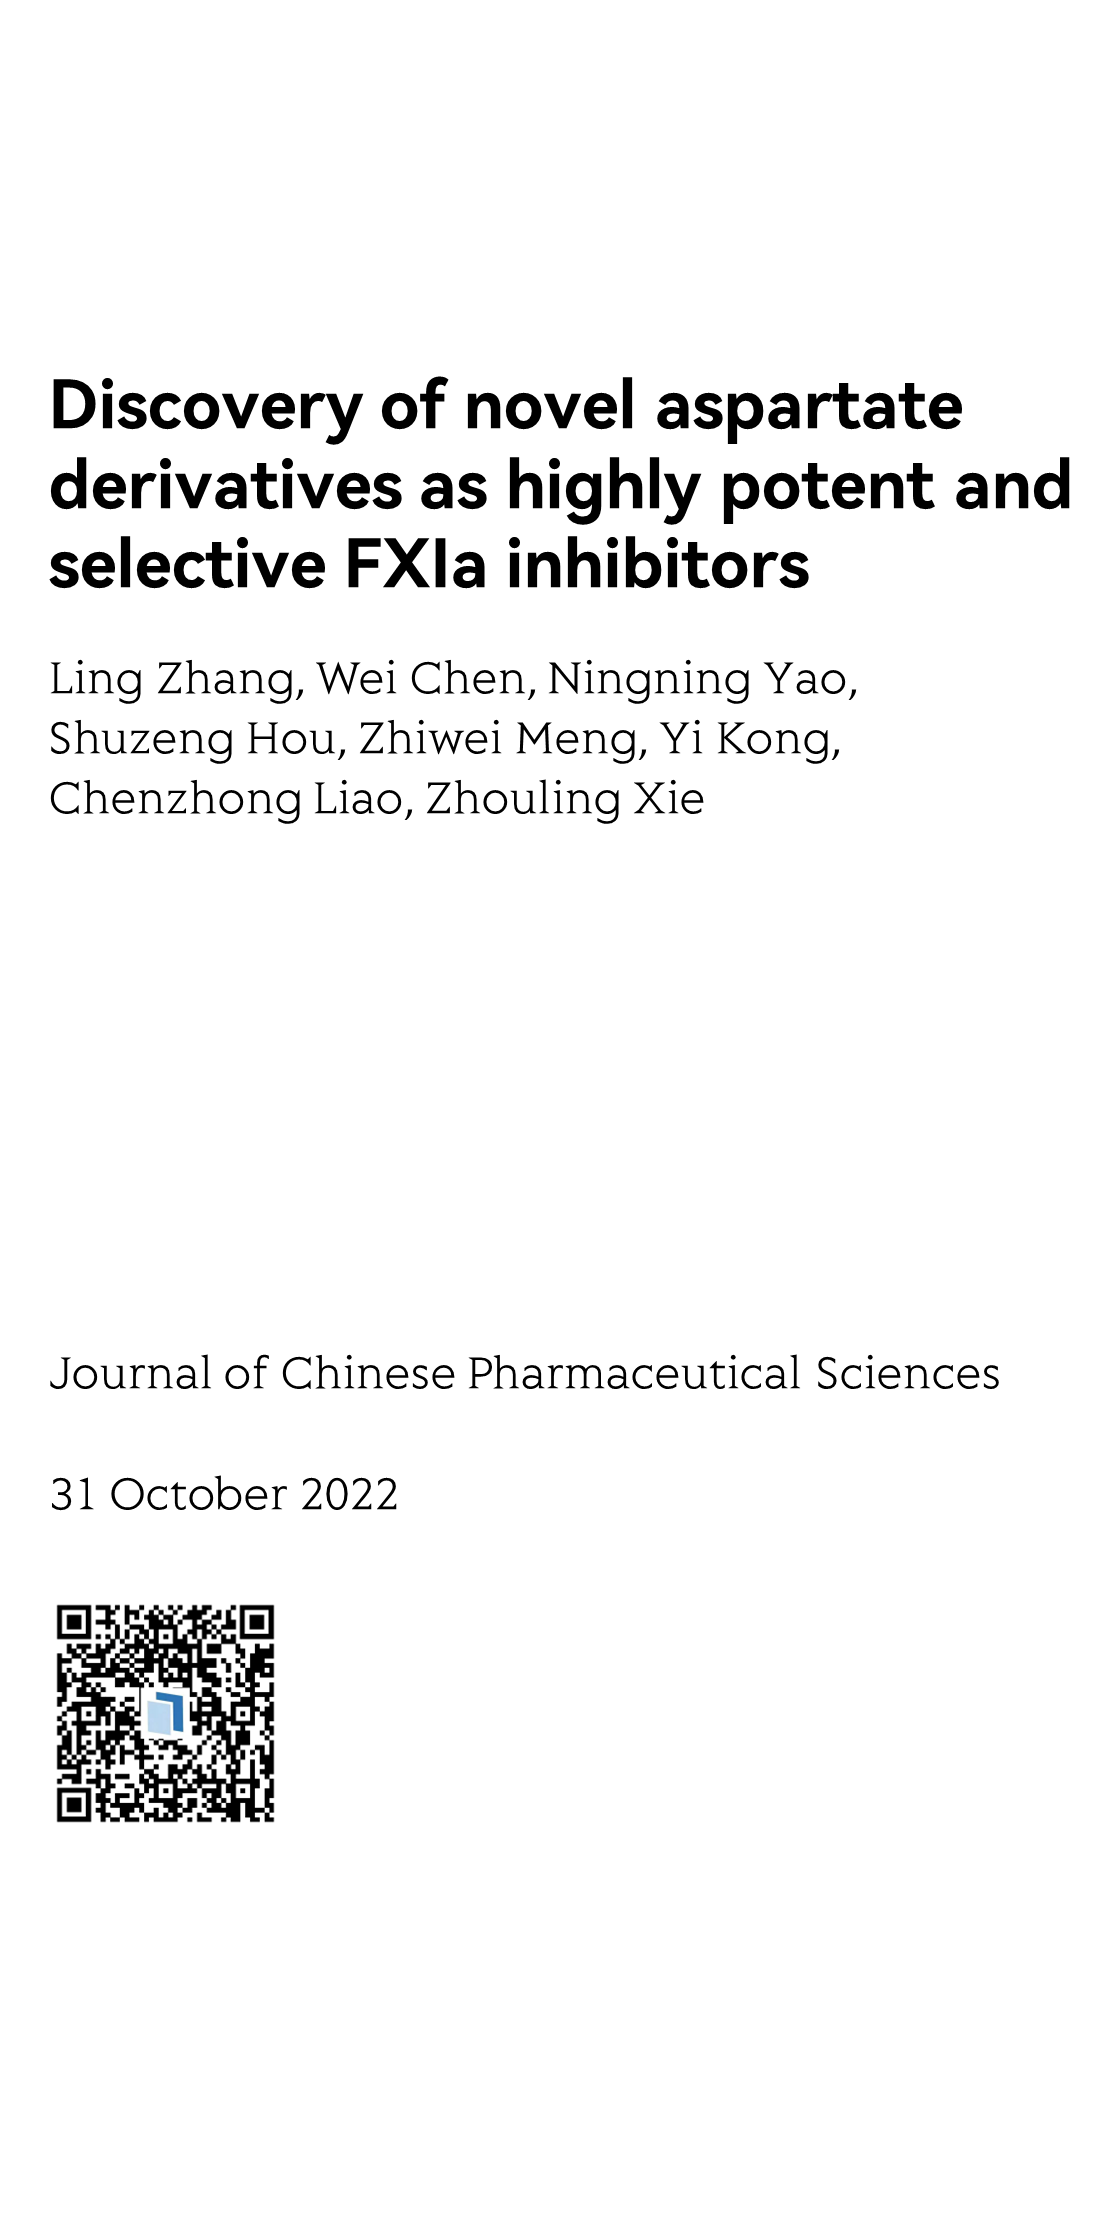 Discovery of novel aspartate derivatives as highly potent and selective FXIa inhibitors_1